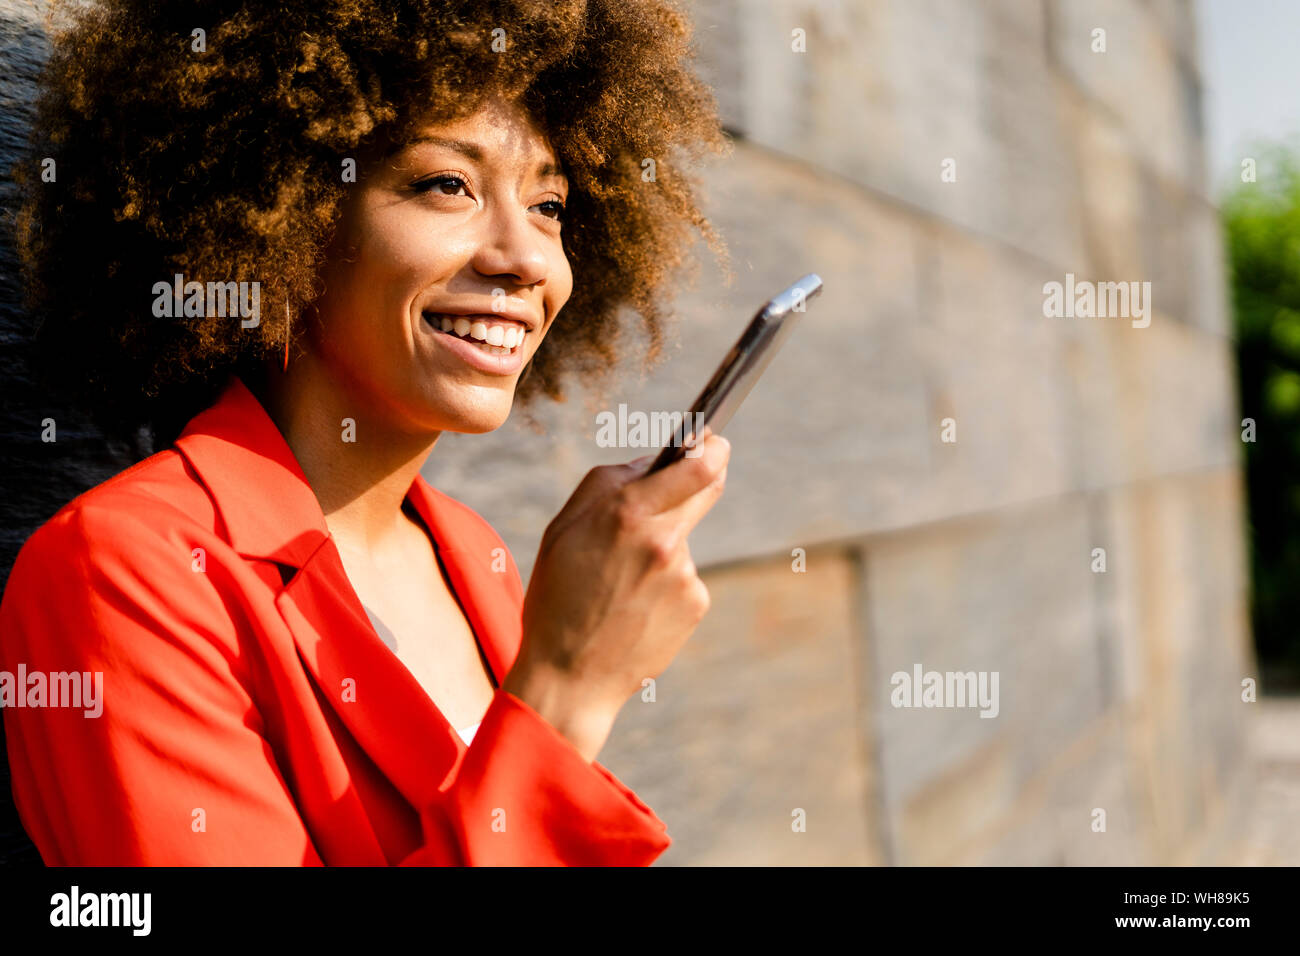 Portrait of smiling young woman on the phone wearing fashionable red suit jacket Stock Photo